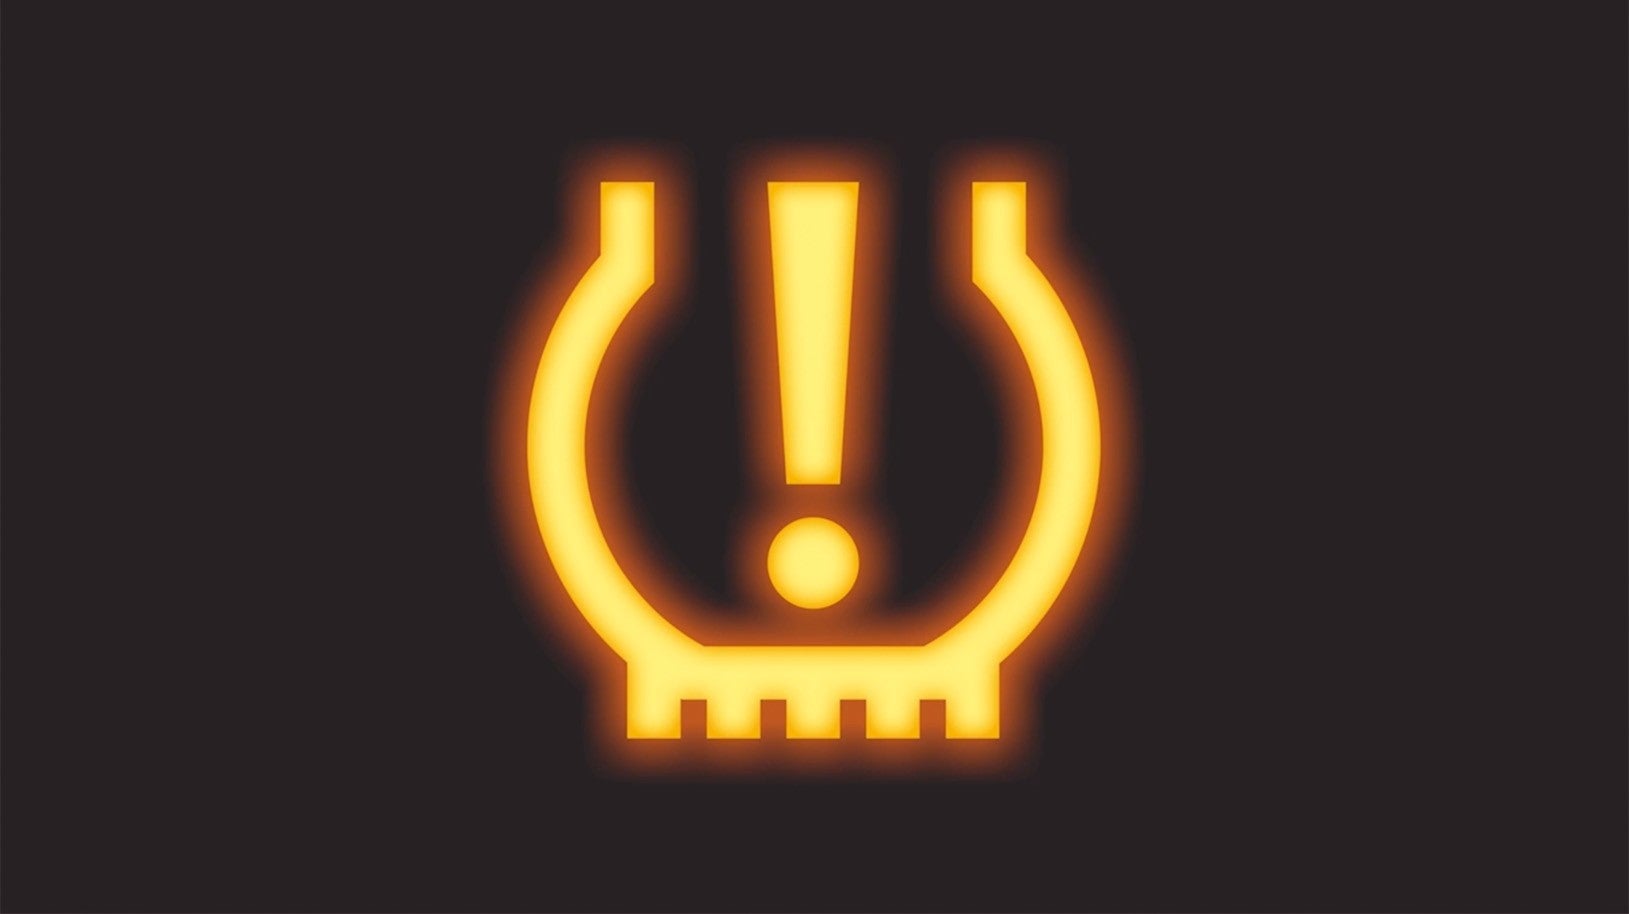  Image of the Tire Pressure Monitoring System Light | LaFontaine Subaru in Commerce Township MI